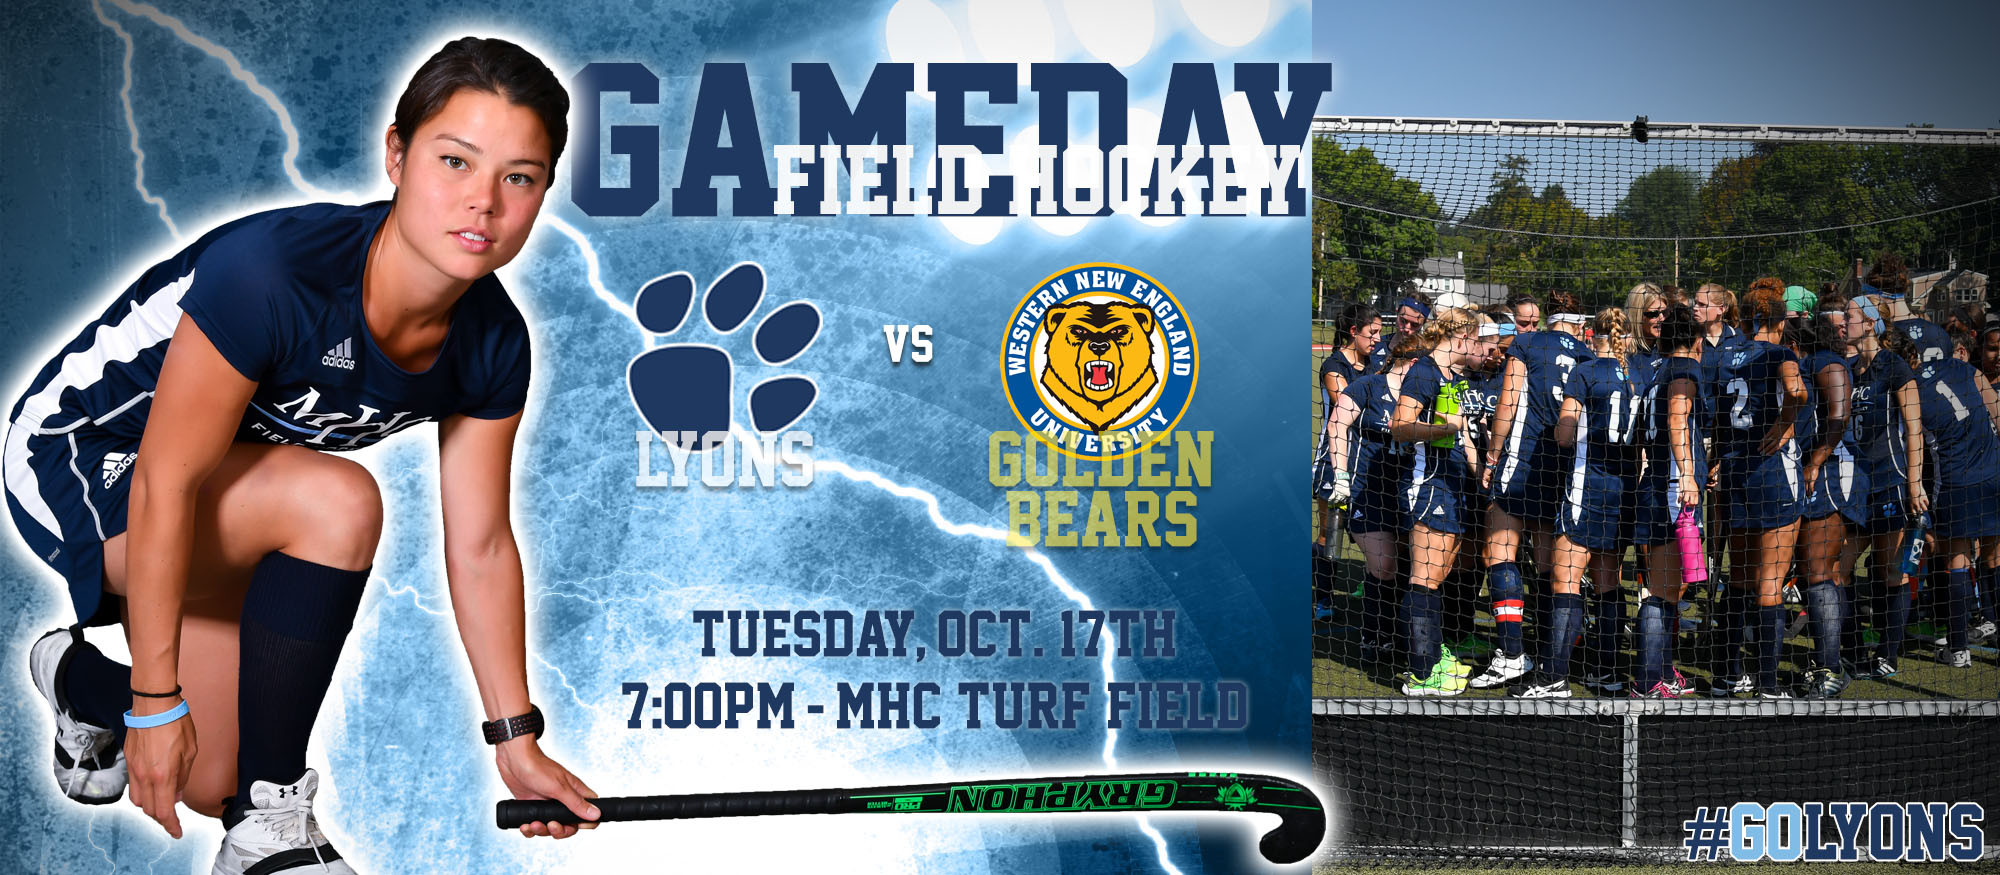 Gameday graphic promoting Tuesday, October 17th's field hockey home match against Western New England. Featured is Lyons field hockey player Liz Delorme.